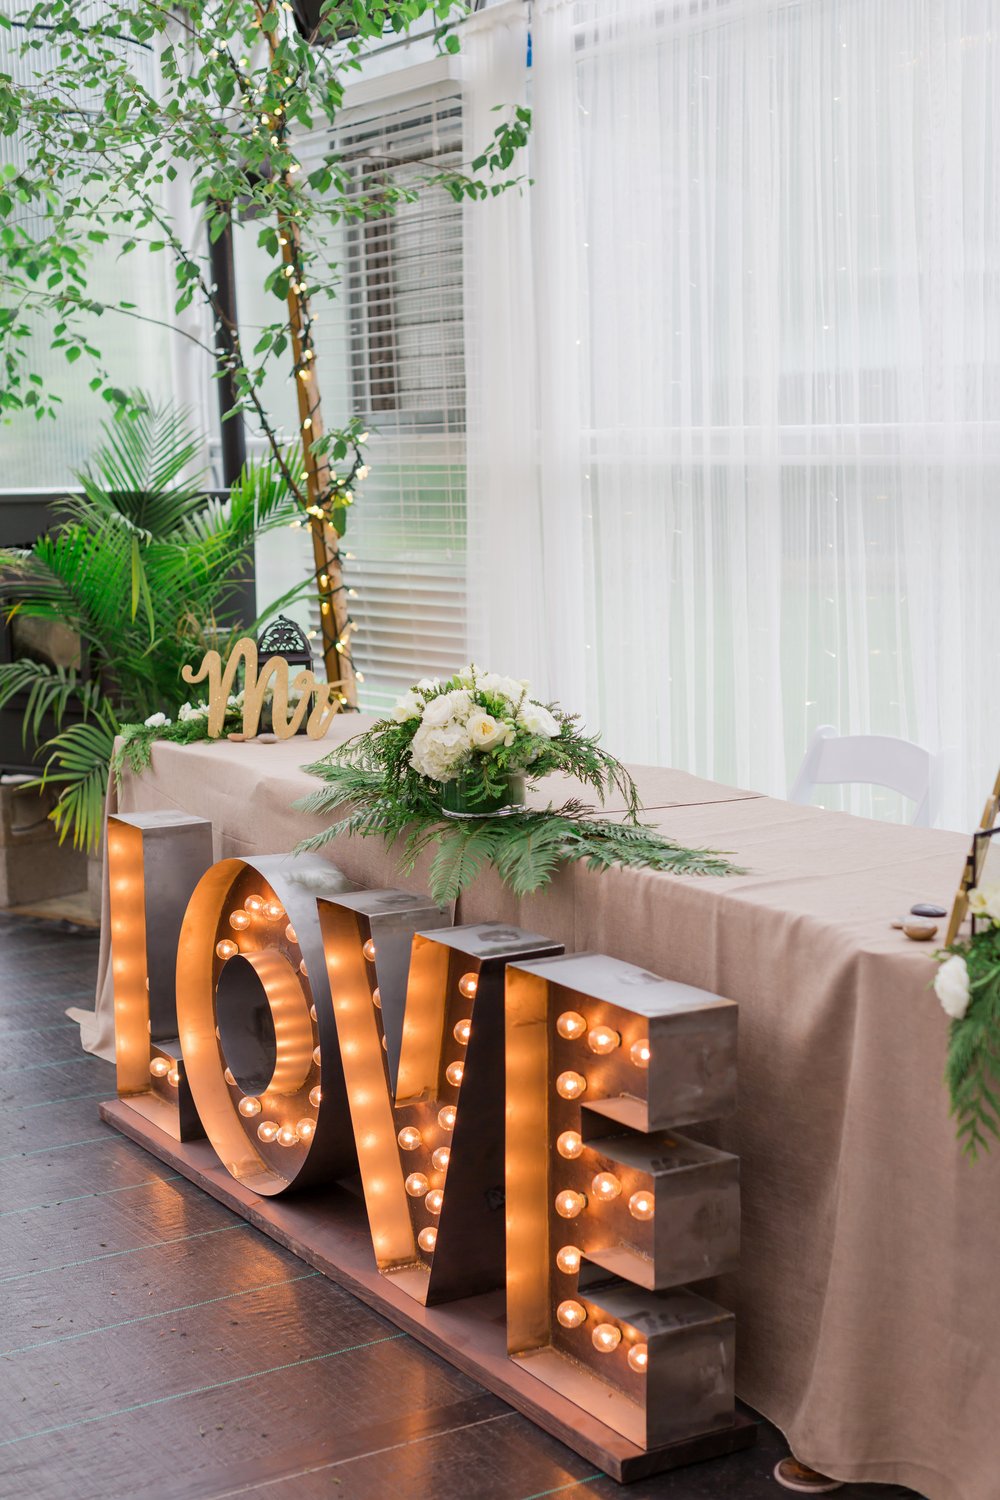  A sweetheart table with marquee letters spelling “LOVE” in front of it. 